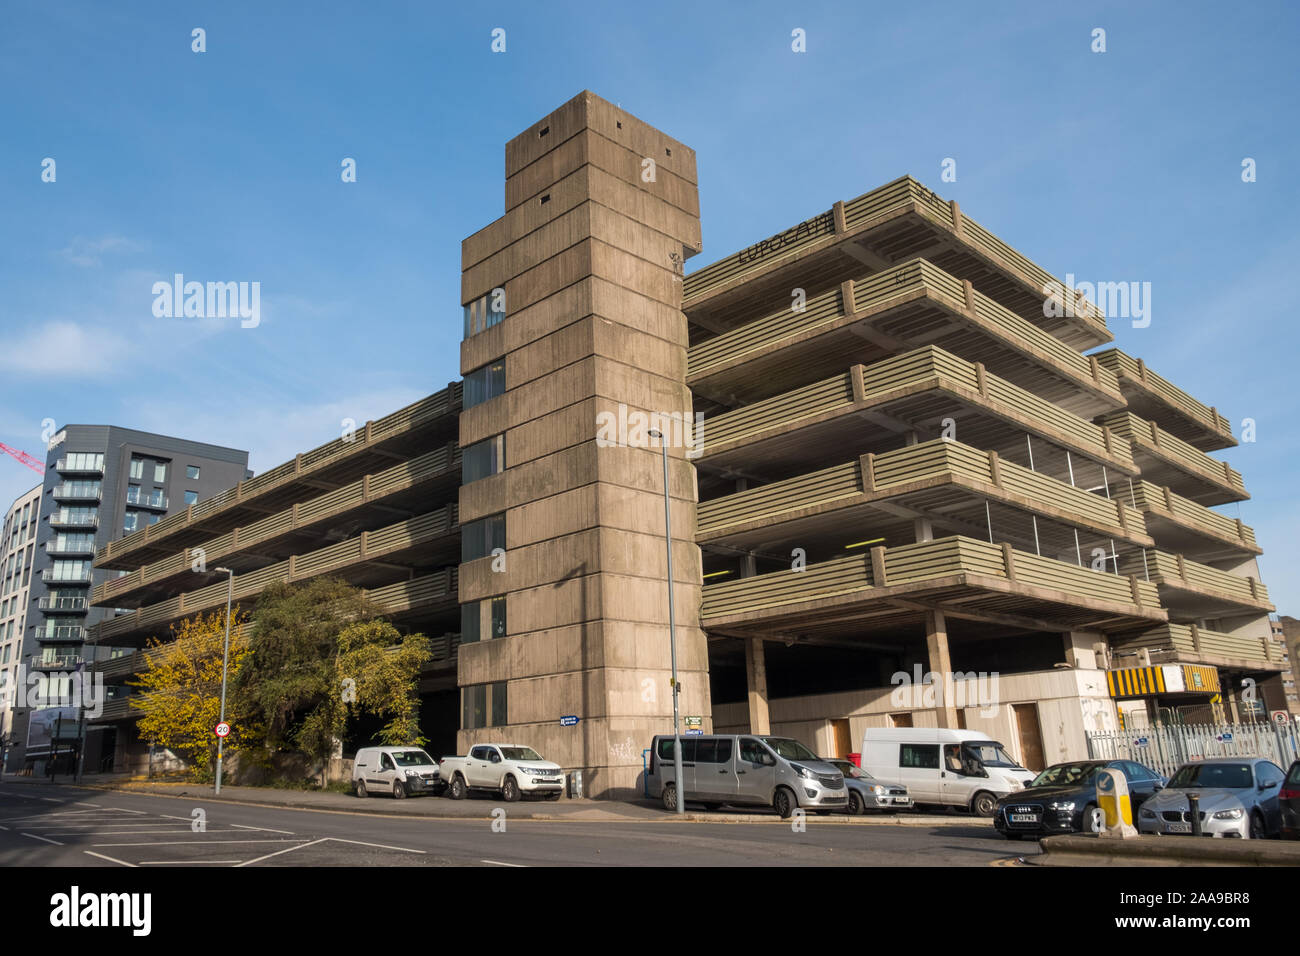 Pershore Street Car Park in Pershore Street Birmingham is an example of a brutalist concrete building Stock Photo